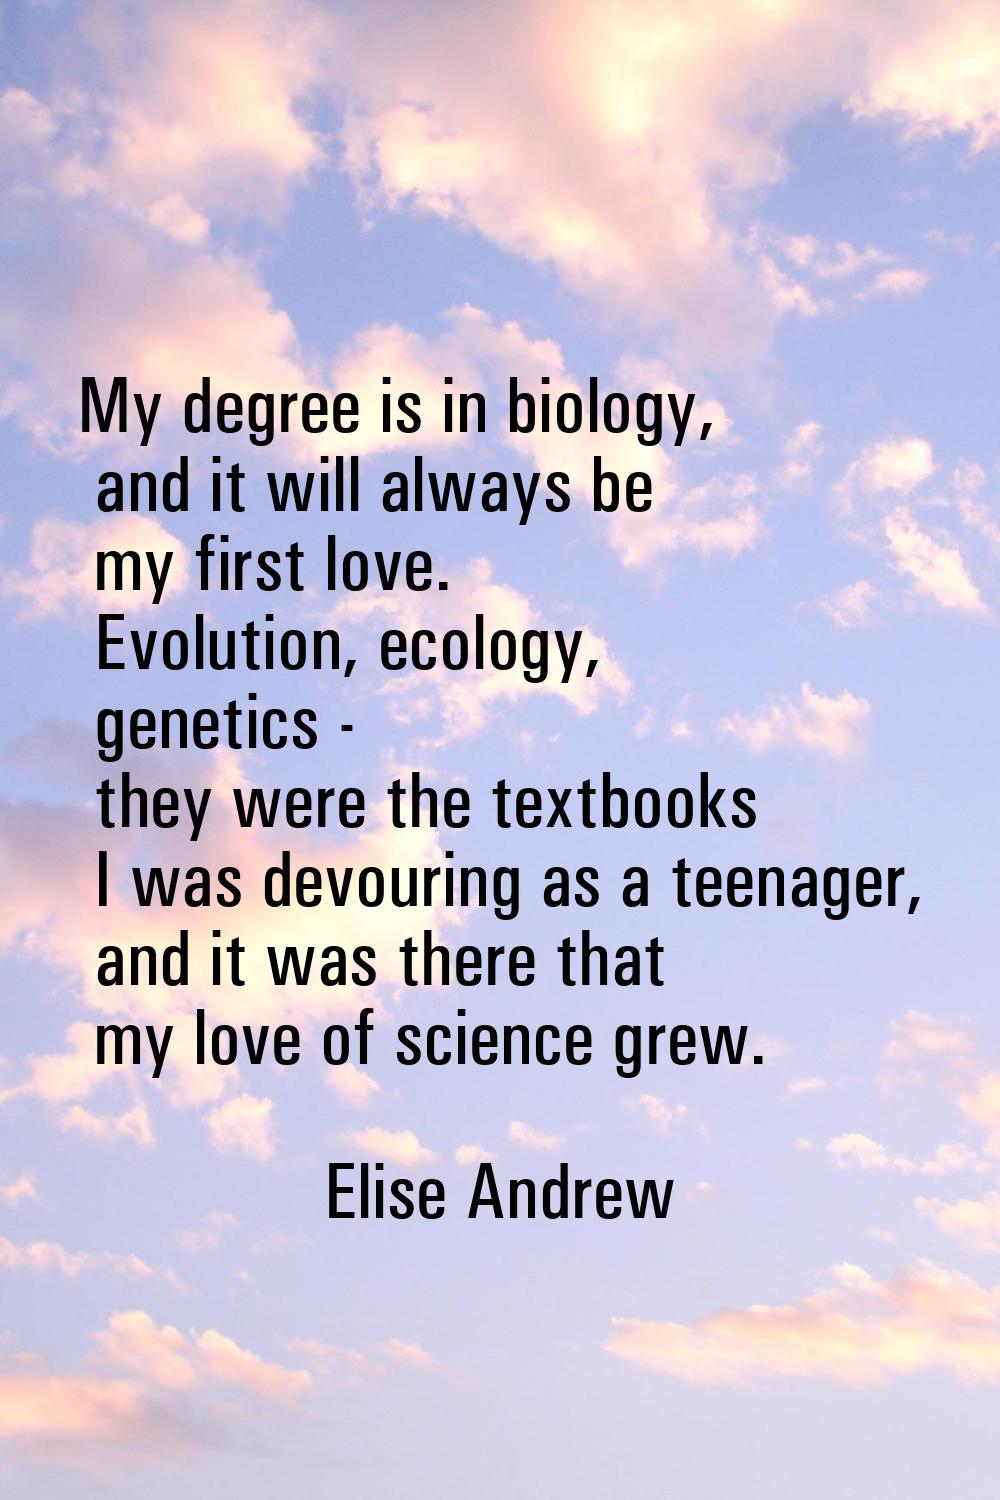 My degree is in biology, and it will always be my first love. Evolution, ecology, genetics - they w